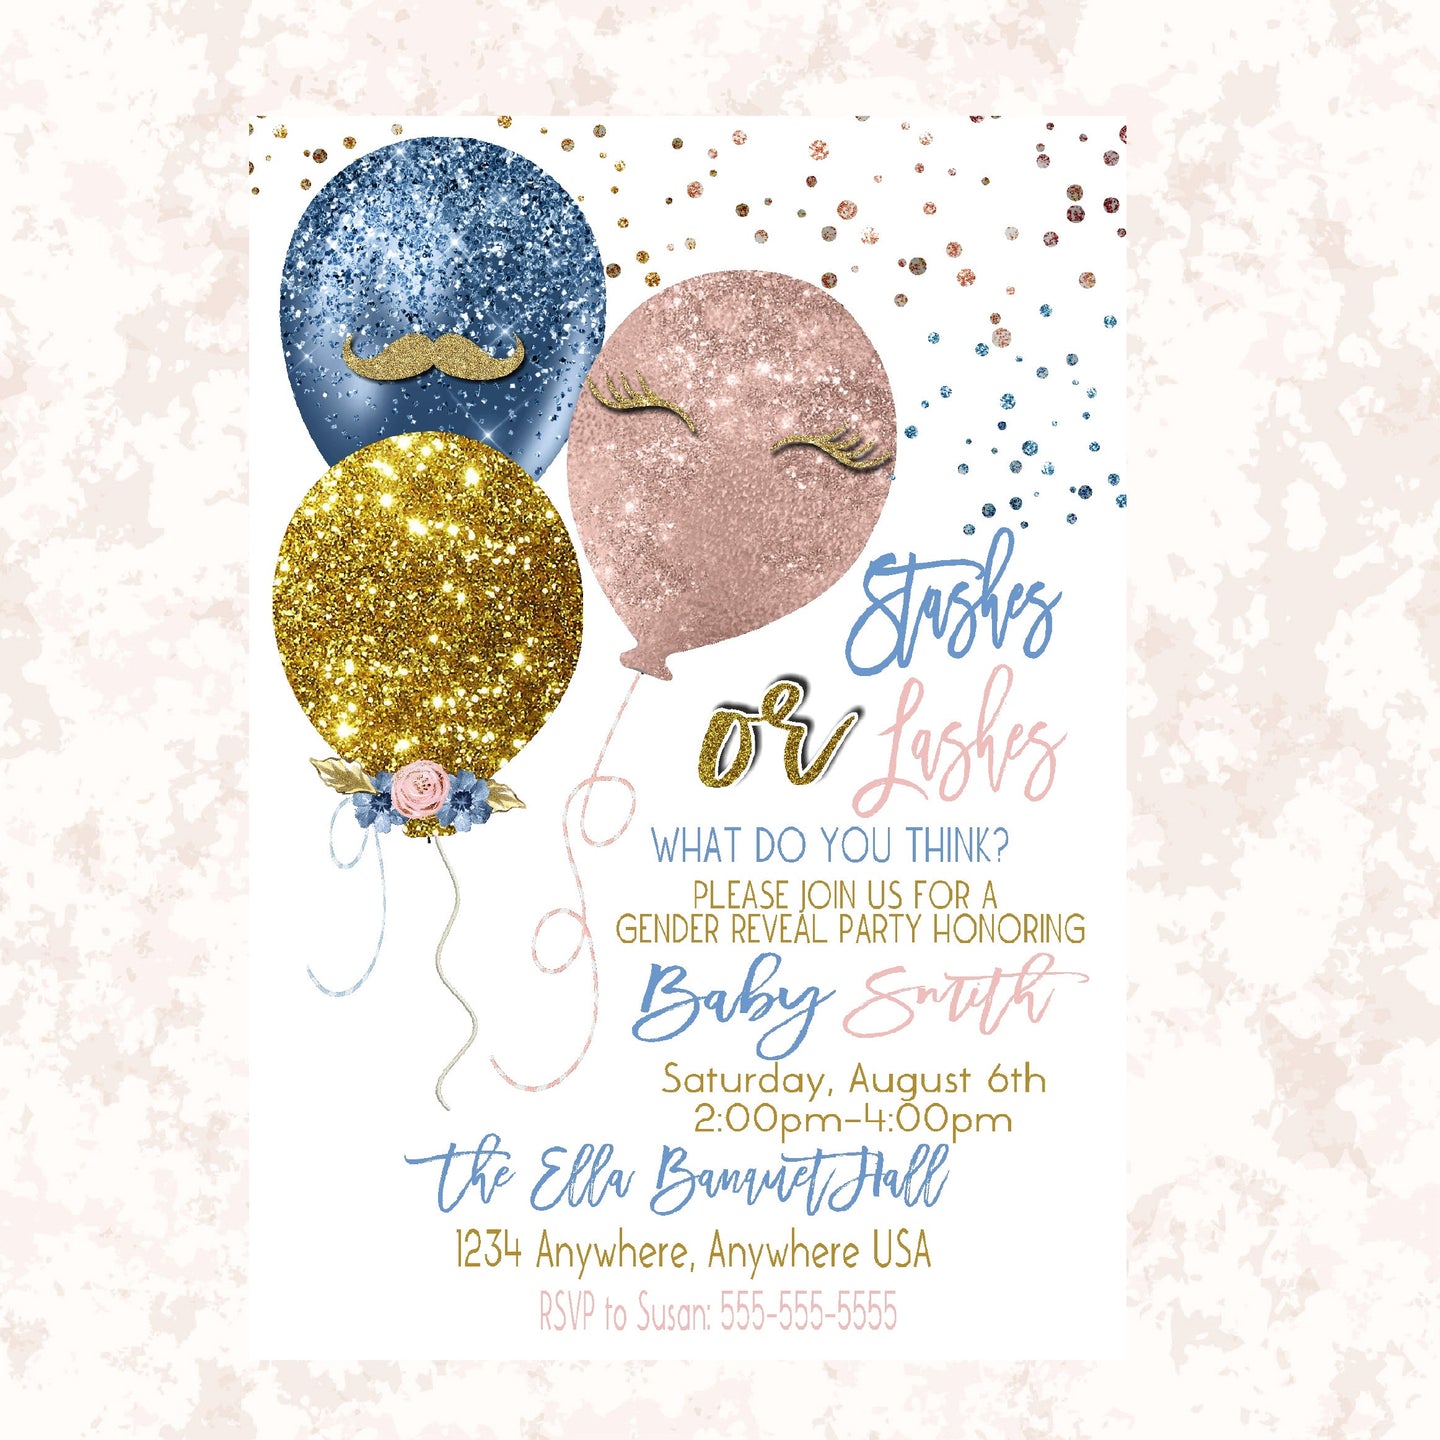 Balloon Gender Reveal  Invitation, Boy or girl, Stashes or Lashes  Baby , Invite blue or pink  printable  blue blush pink gold Glitter, 009